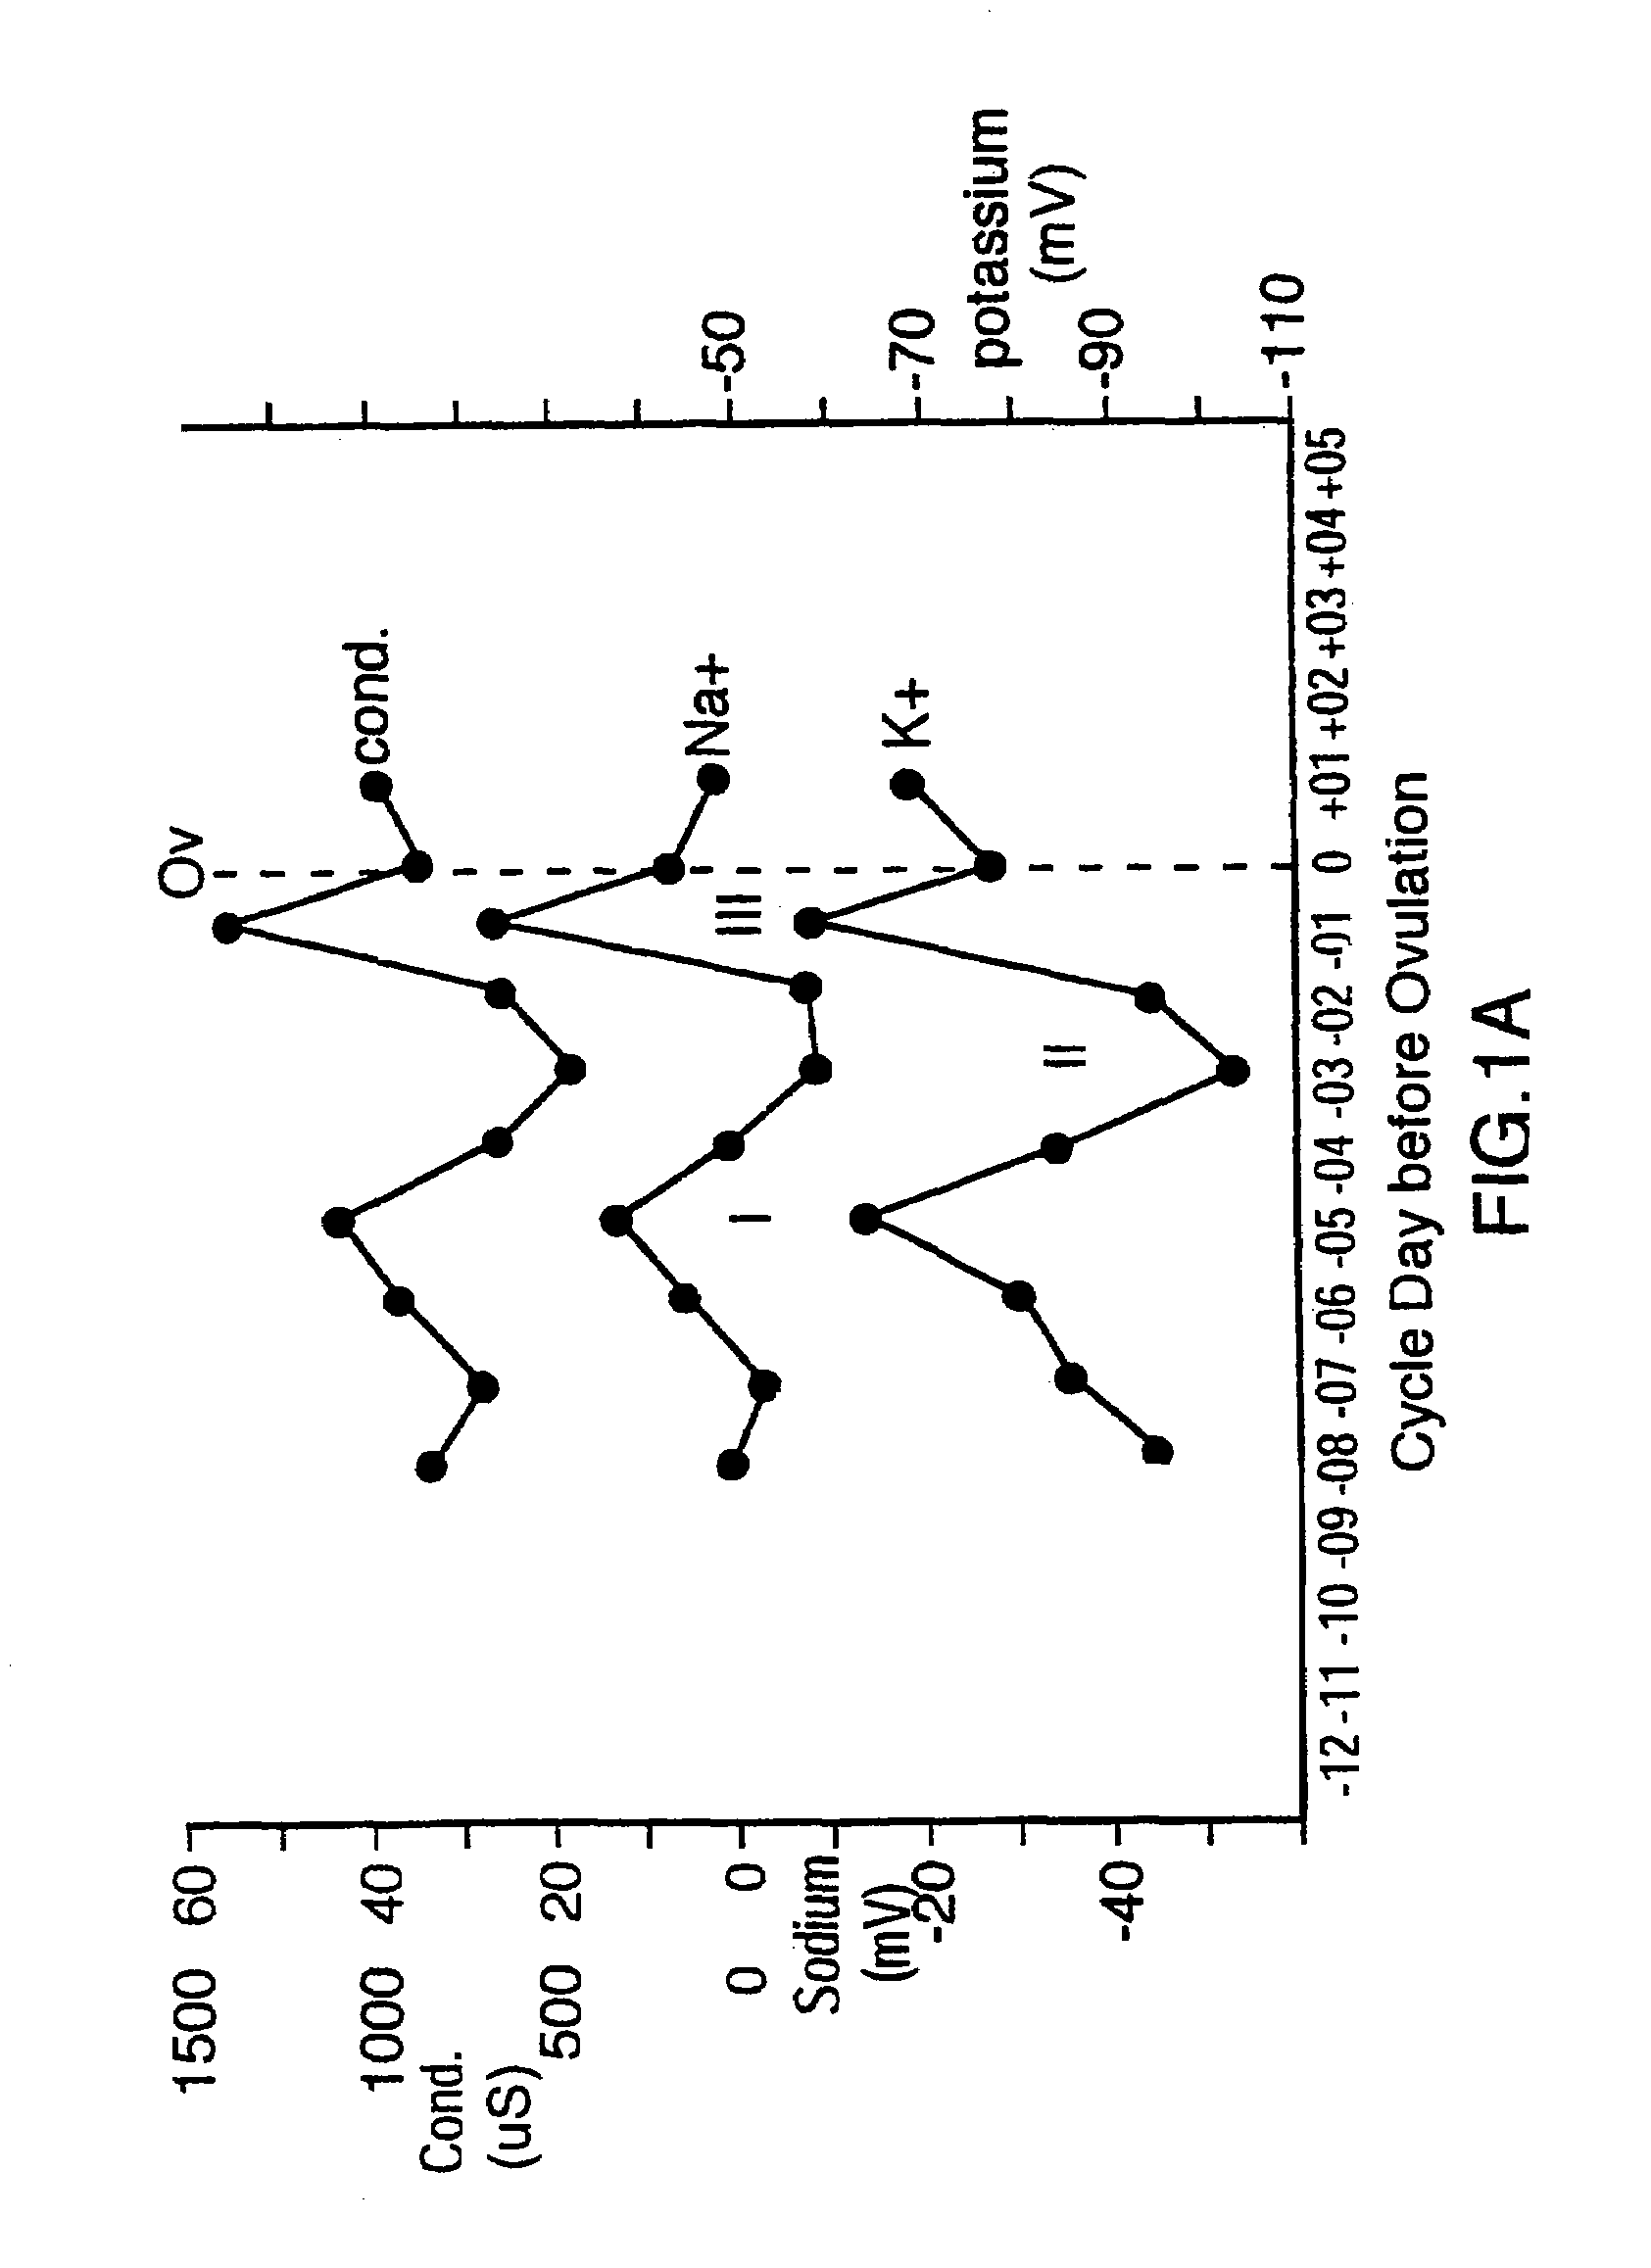 Method and device for predicting the fertile phase of women